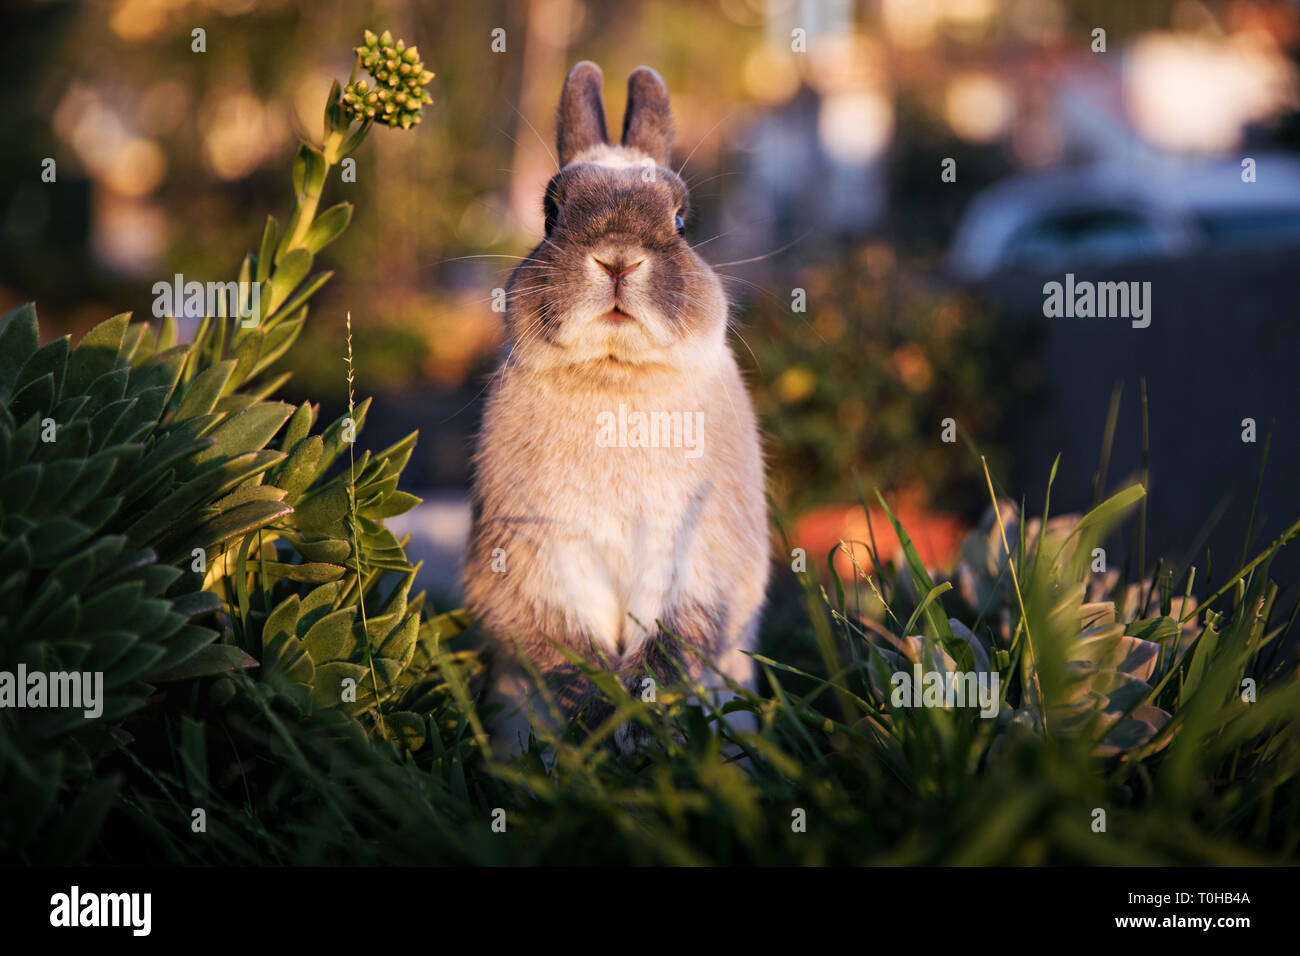 A dwarf bunny standing on his hind legs in a grassy garden and looking direction at camera with an animated expression. Stock Photo